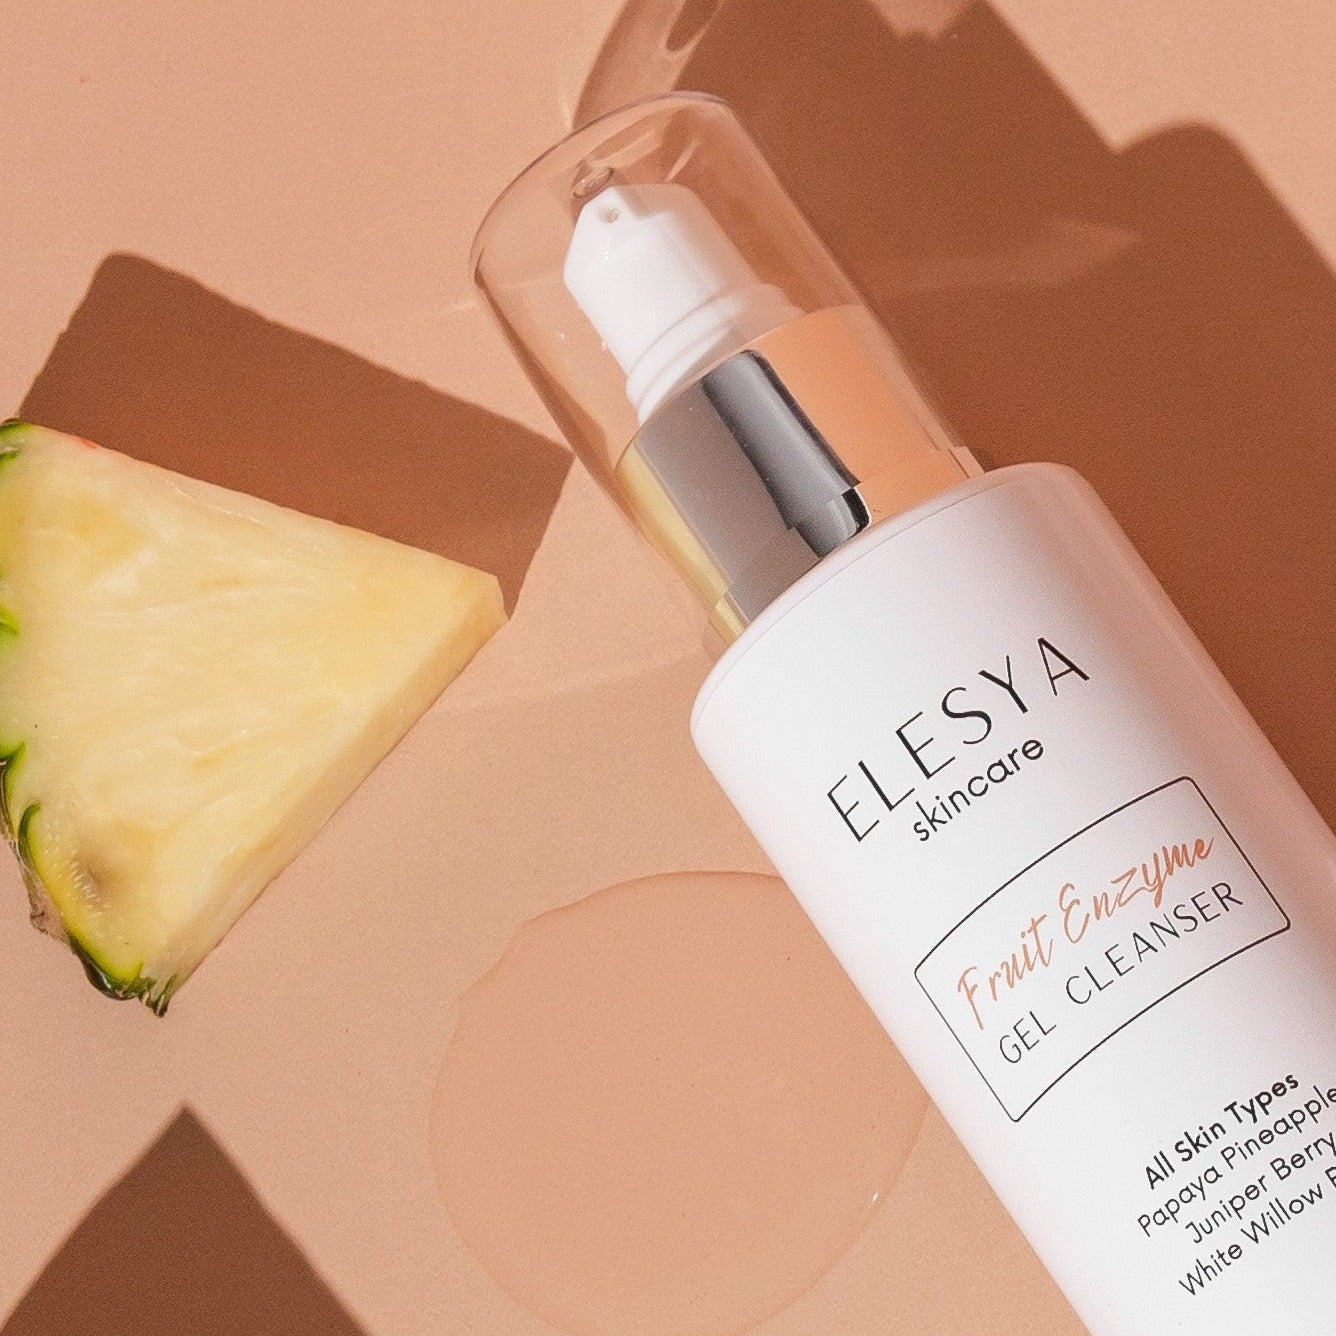 Elesya skincare - All in one Fruit enzyme gentle gel cleanser - Australian made natural skincare